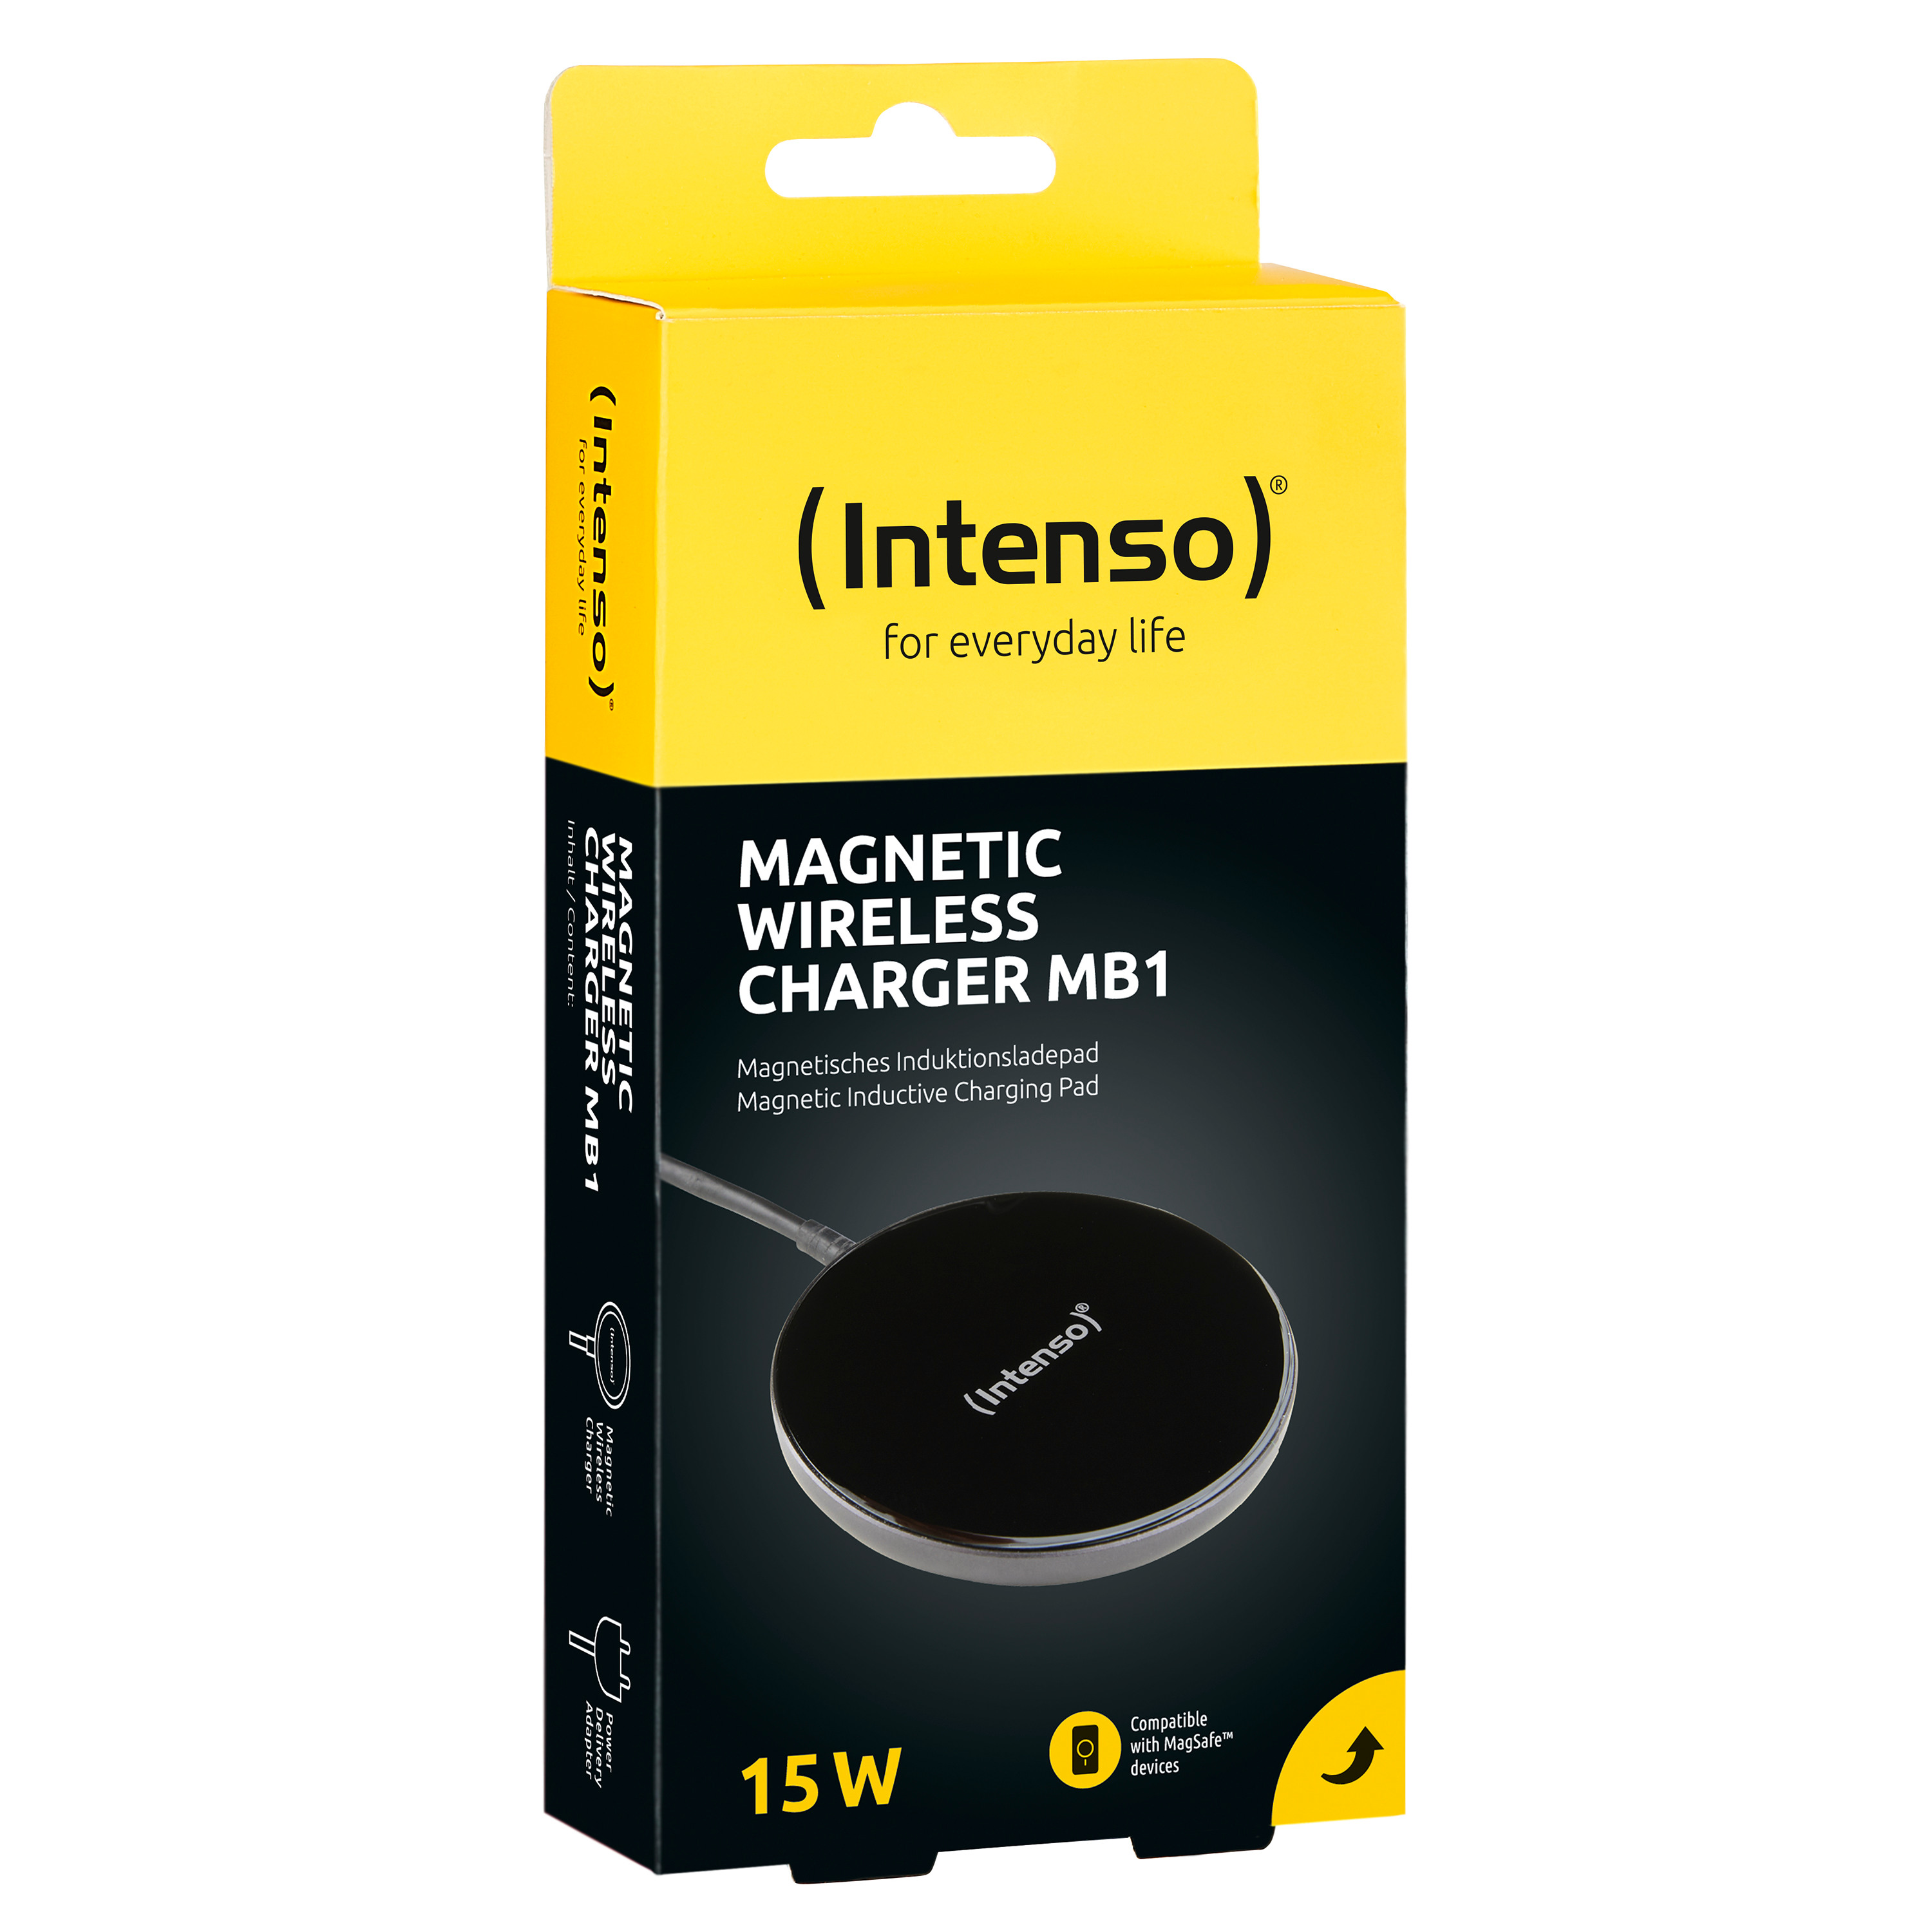 INTENSO Magnetic Wireless Charger MB1 7410710 MagSafe compatibility black